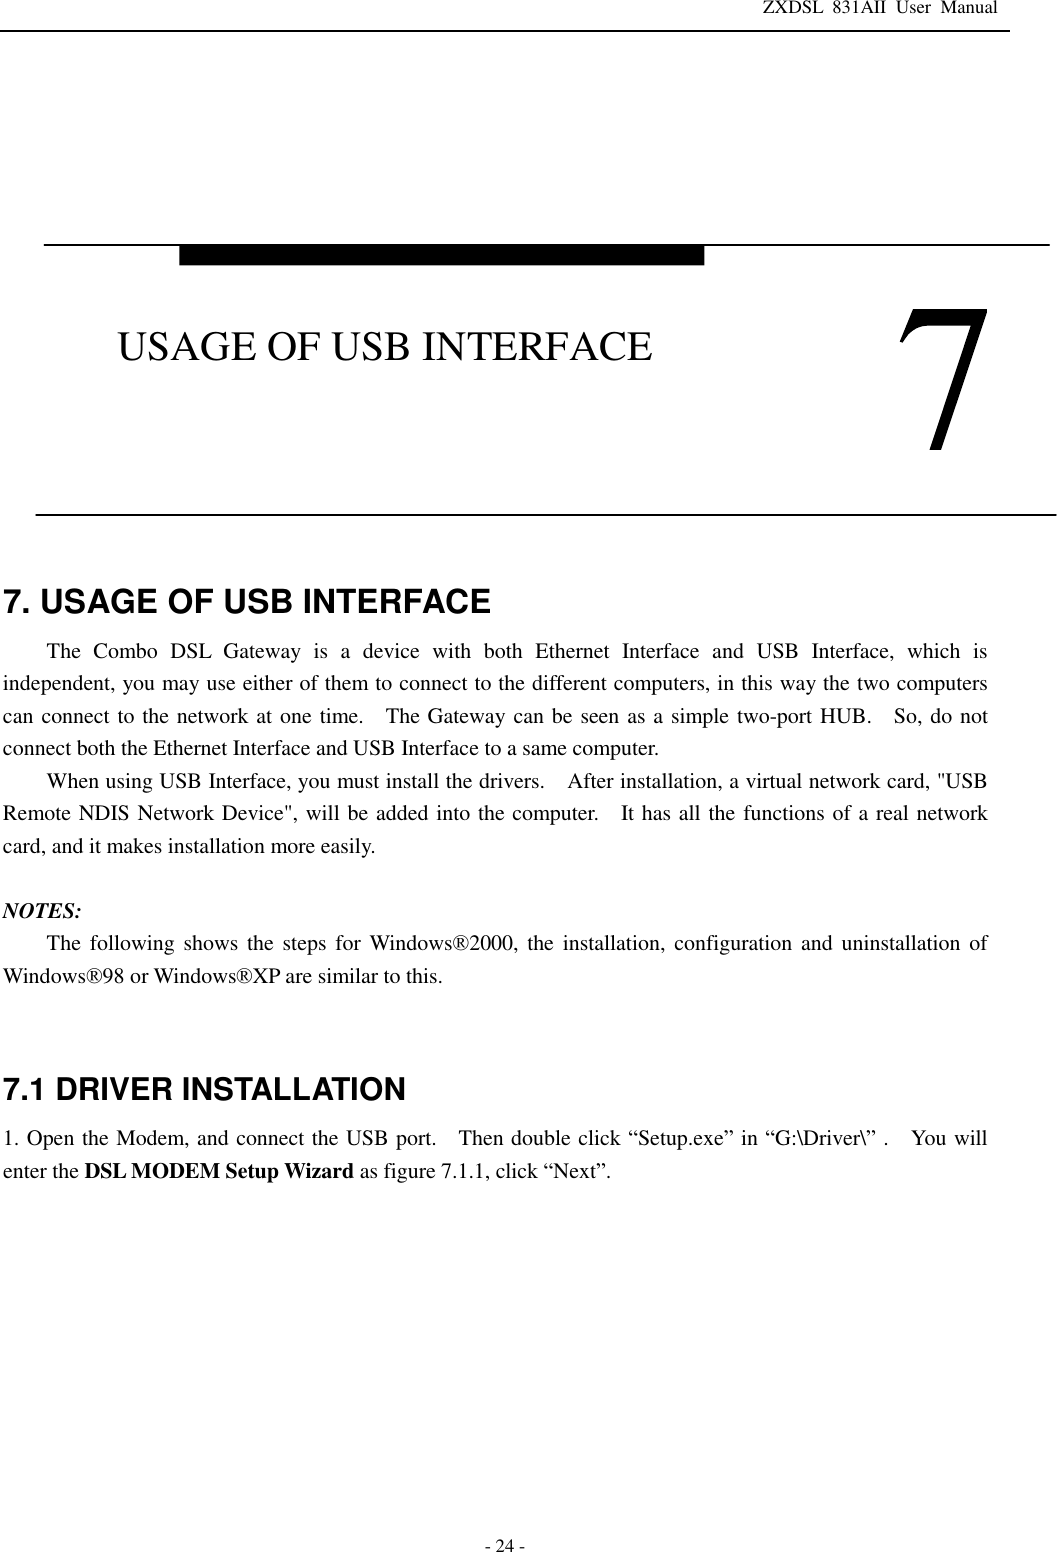 ZXDSL 831AII User Manual  - 24 -     7. USAGE OF USB INTERFACE   The Combo DSL Gateway is a device with both Ethernet Interface and USB Interface, which is independent, you may use either of them to connect to the different computers, in this way the two computers can connect to the network at one time.  The Gateway can be seen as a simple two-port HUB.  So, do not connect both the Ethernet Interface and USB Interface to a same computer. When using USB Interface, you must install the drivers.  After installation, a virtual network card, &quot;USB Remote NDIS Network Device&quot;, will be added into the computer.  It has all the functions of a real network card, and it makes installation more easily.  NOTES: The following shows the steps for Windows®2000, the installation, configuration and uninstallation of Windows®98 or Windows®XP are similar to this.  7.1 DRIVER INSTALLATION 1. Open the Modem, and connect the USB port.  Then double click “Setup.exe” in “G:\Driver\” .  You will enter the DSL MODEM Setup Wizard as figure 7.1.1, click “Next”.    USAGE OF USB INTERFACE 